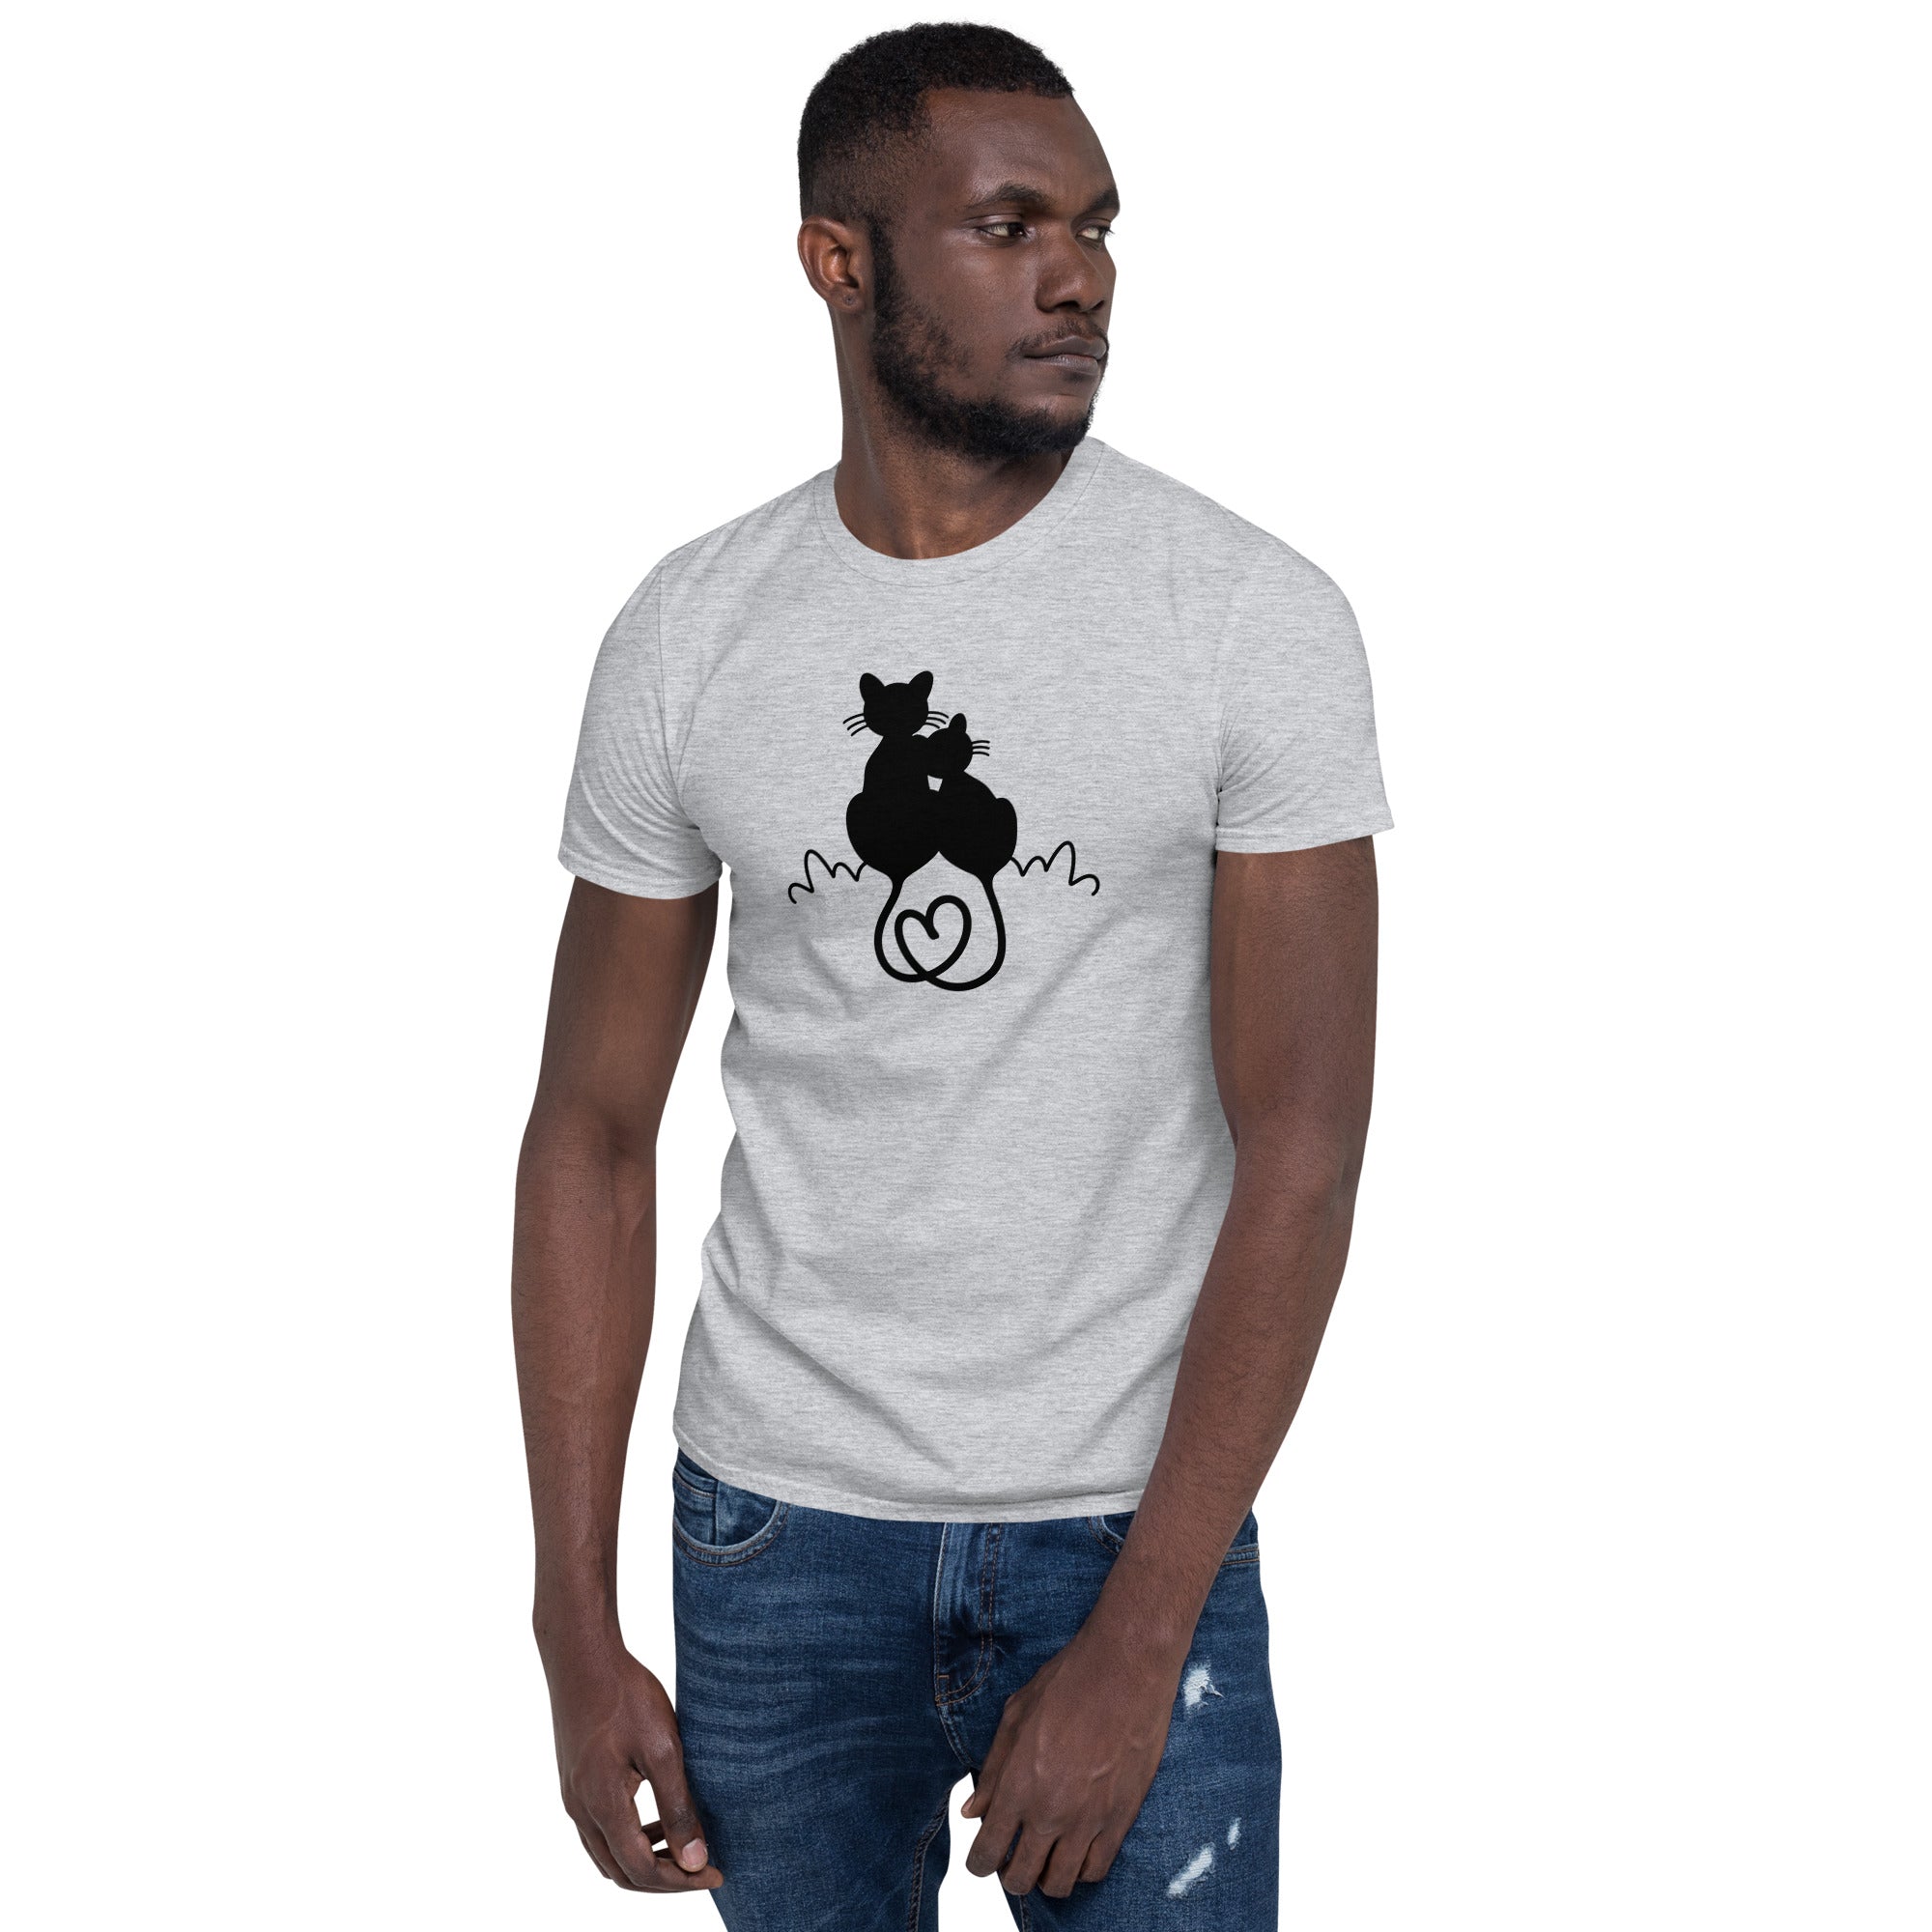 Cats with Tail Forming a Heart - Short-Sleeve Unisex T-Shirt